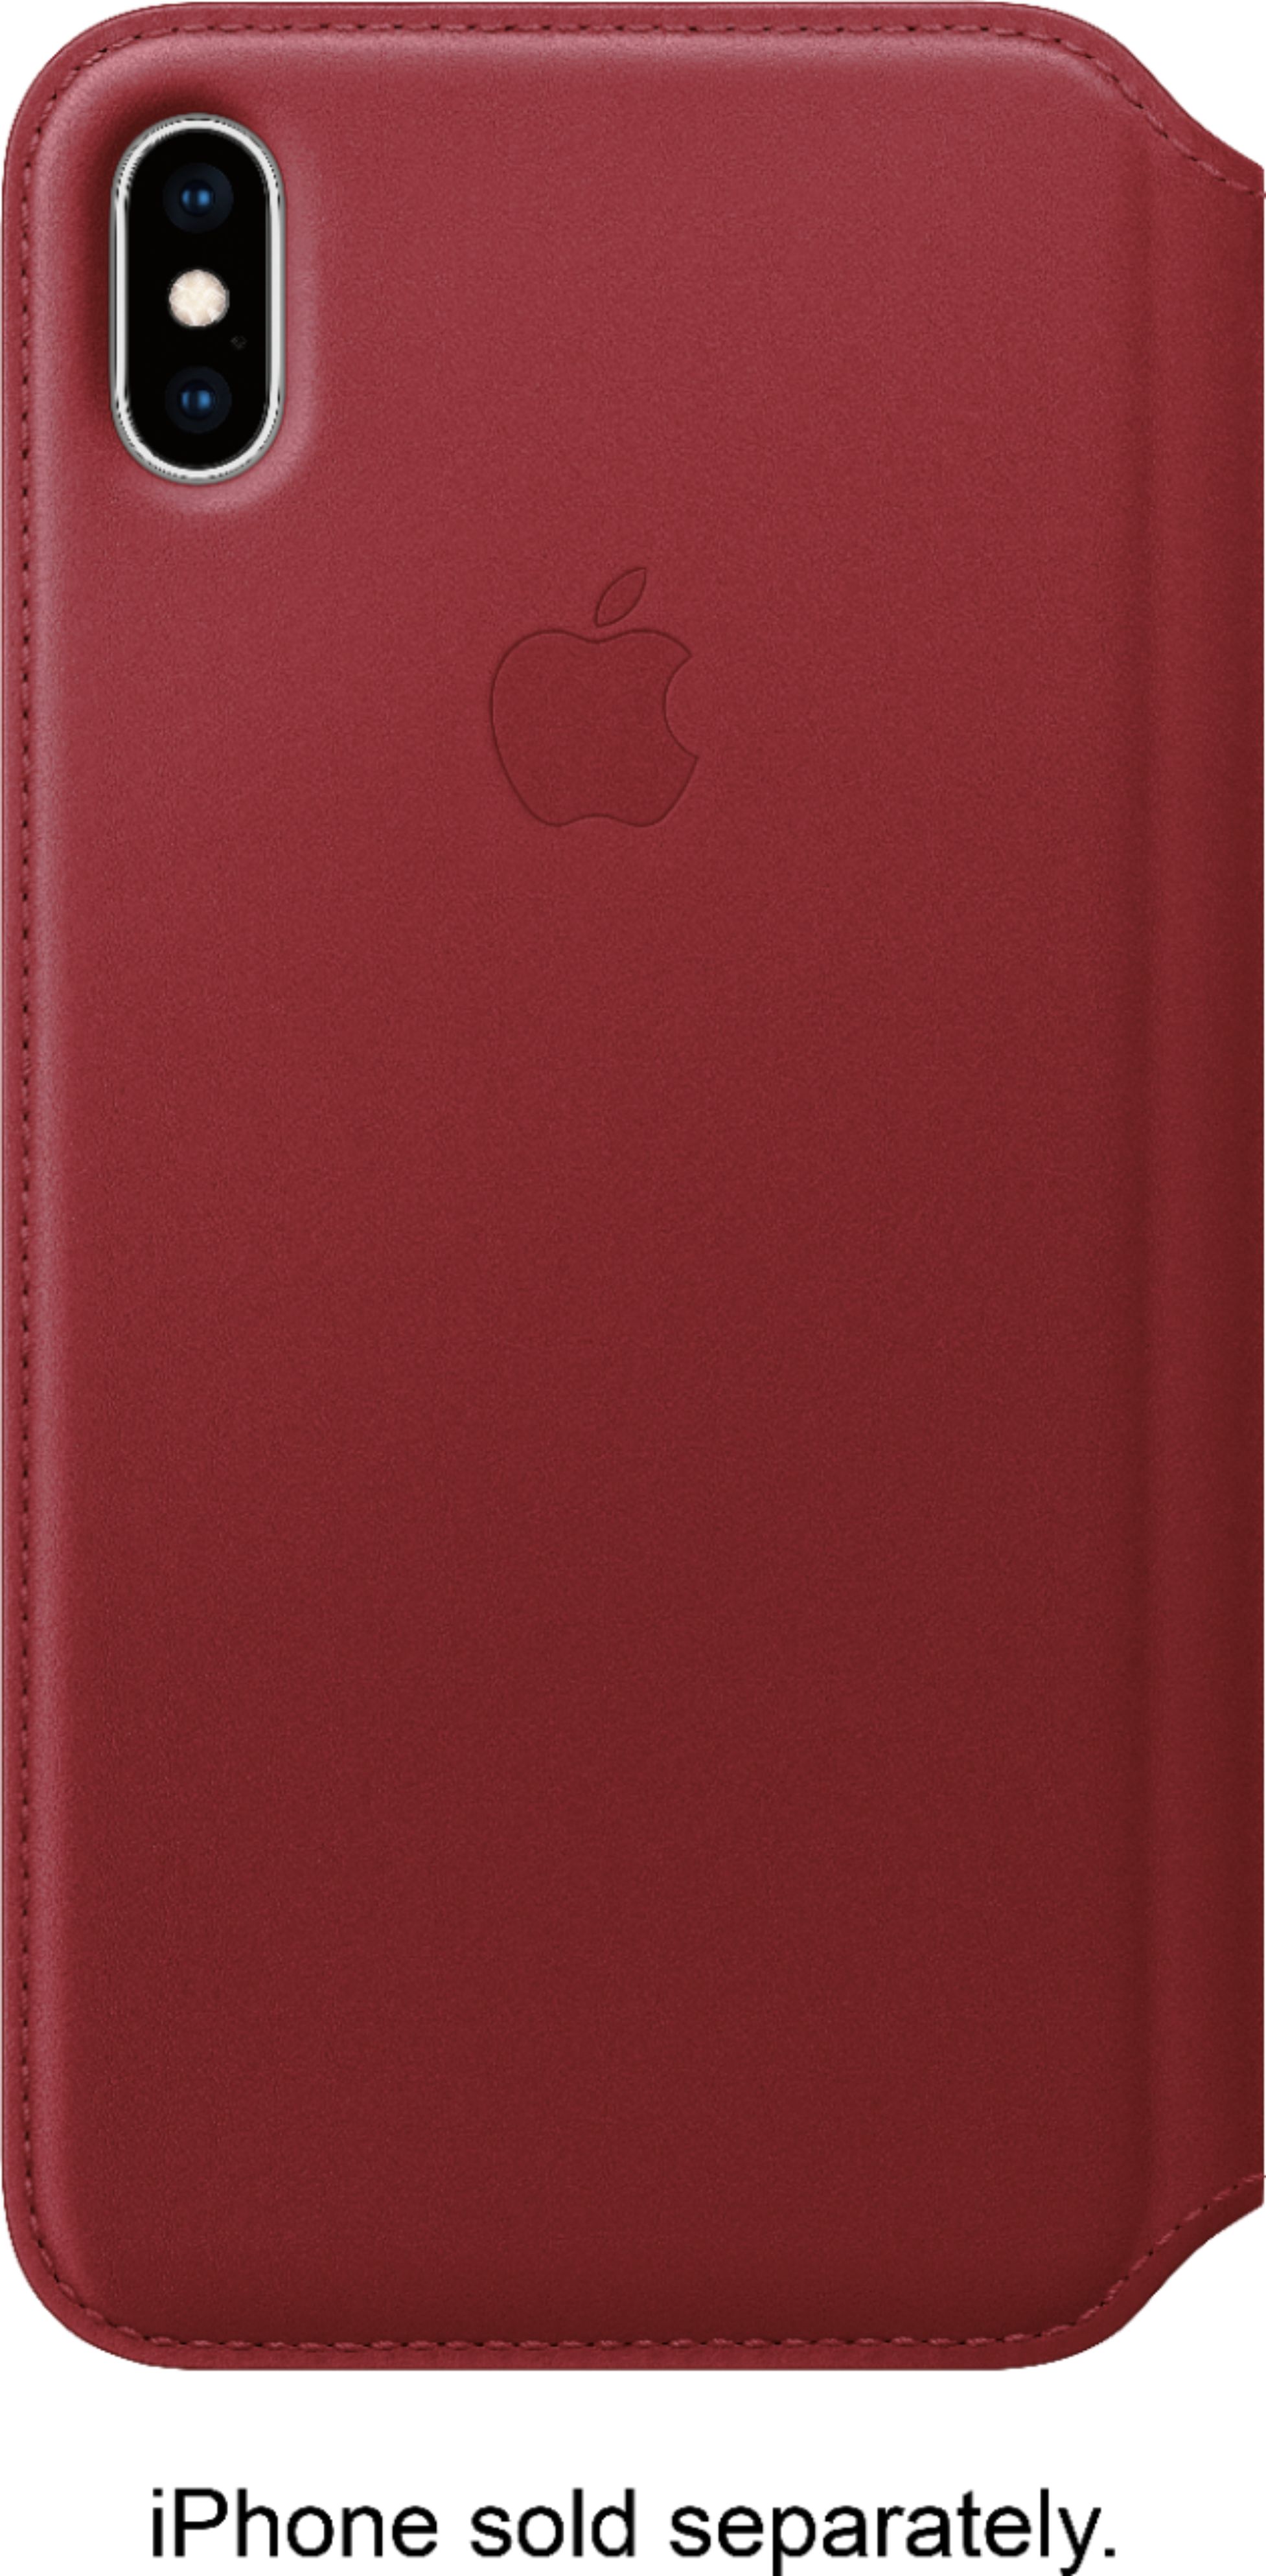 Absorbere varsel Vittig Apple iPhone® XS Max Leather Folio (PRODUCT)RED MRX32ZM/A - Best Buy